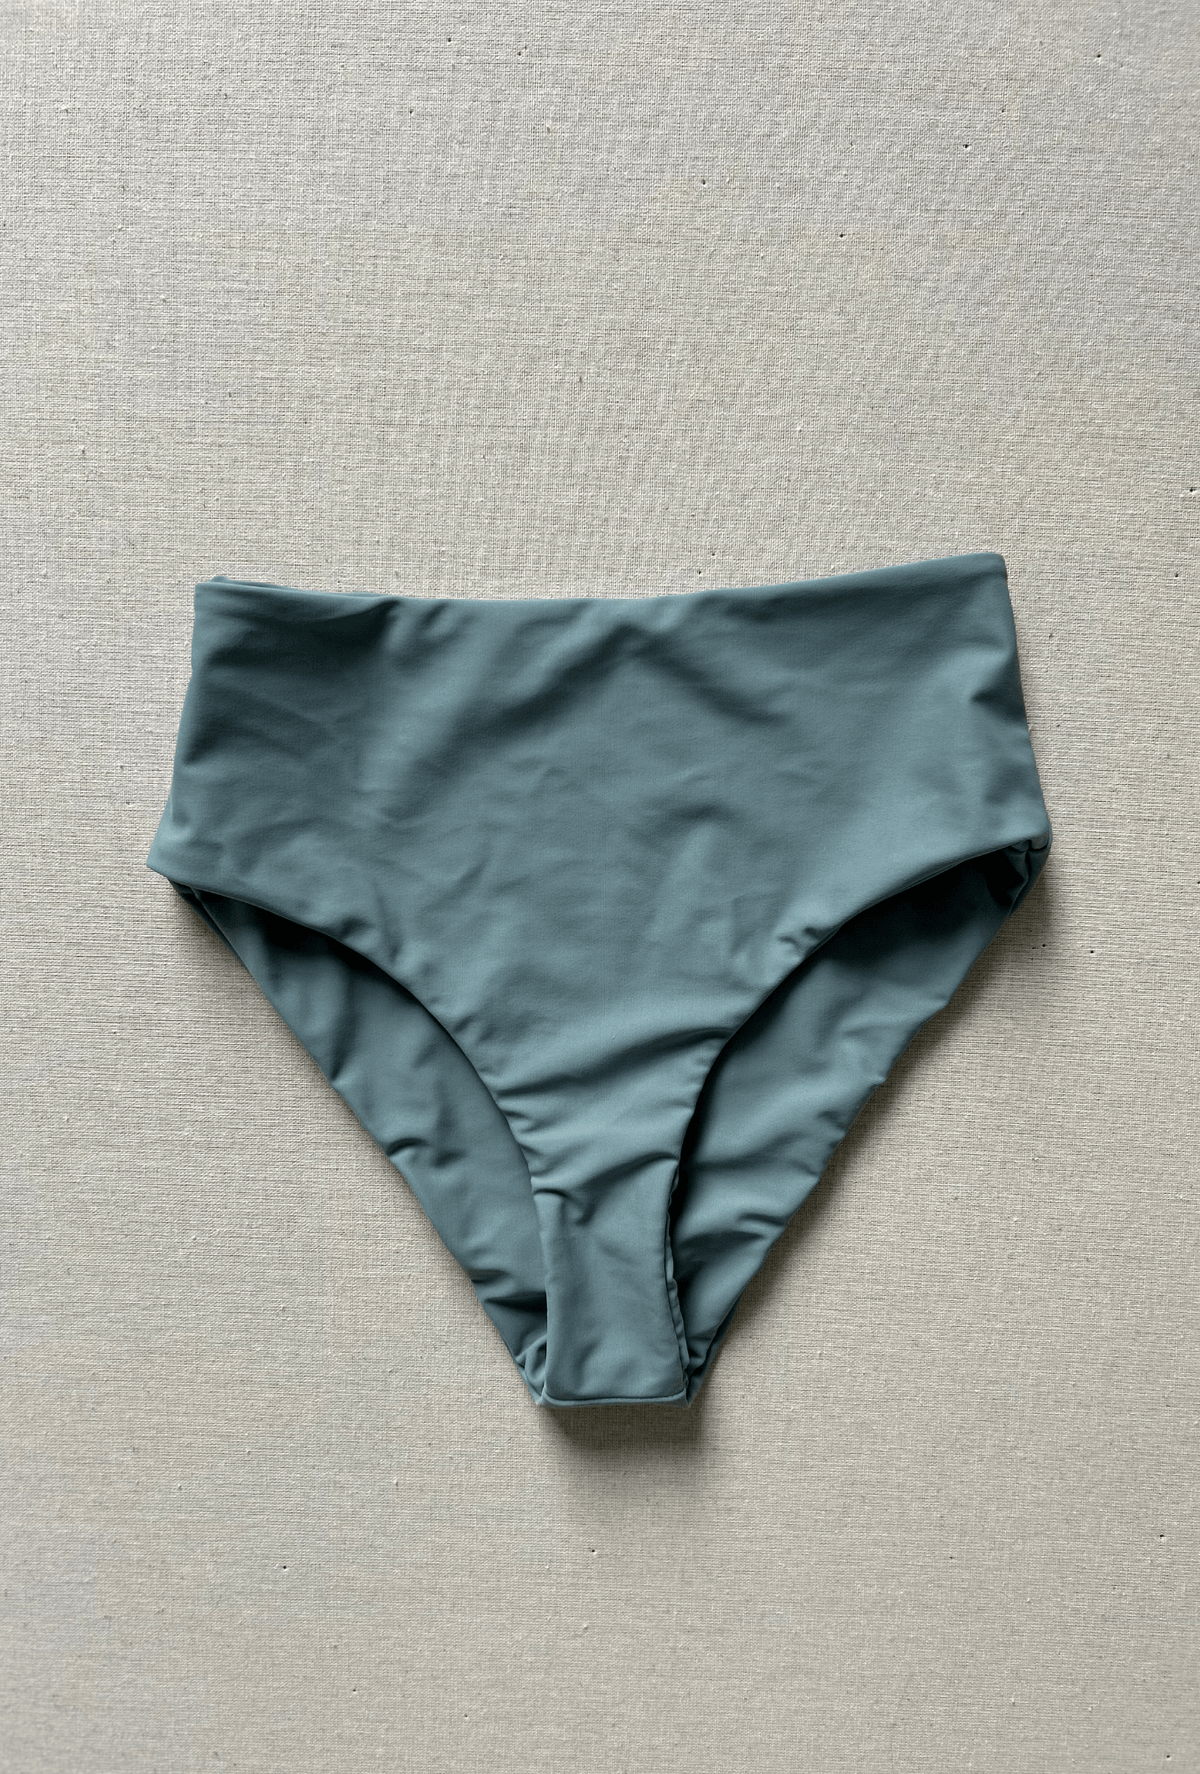 isla bottom in dusted blue - size small